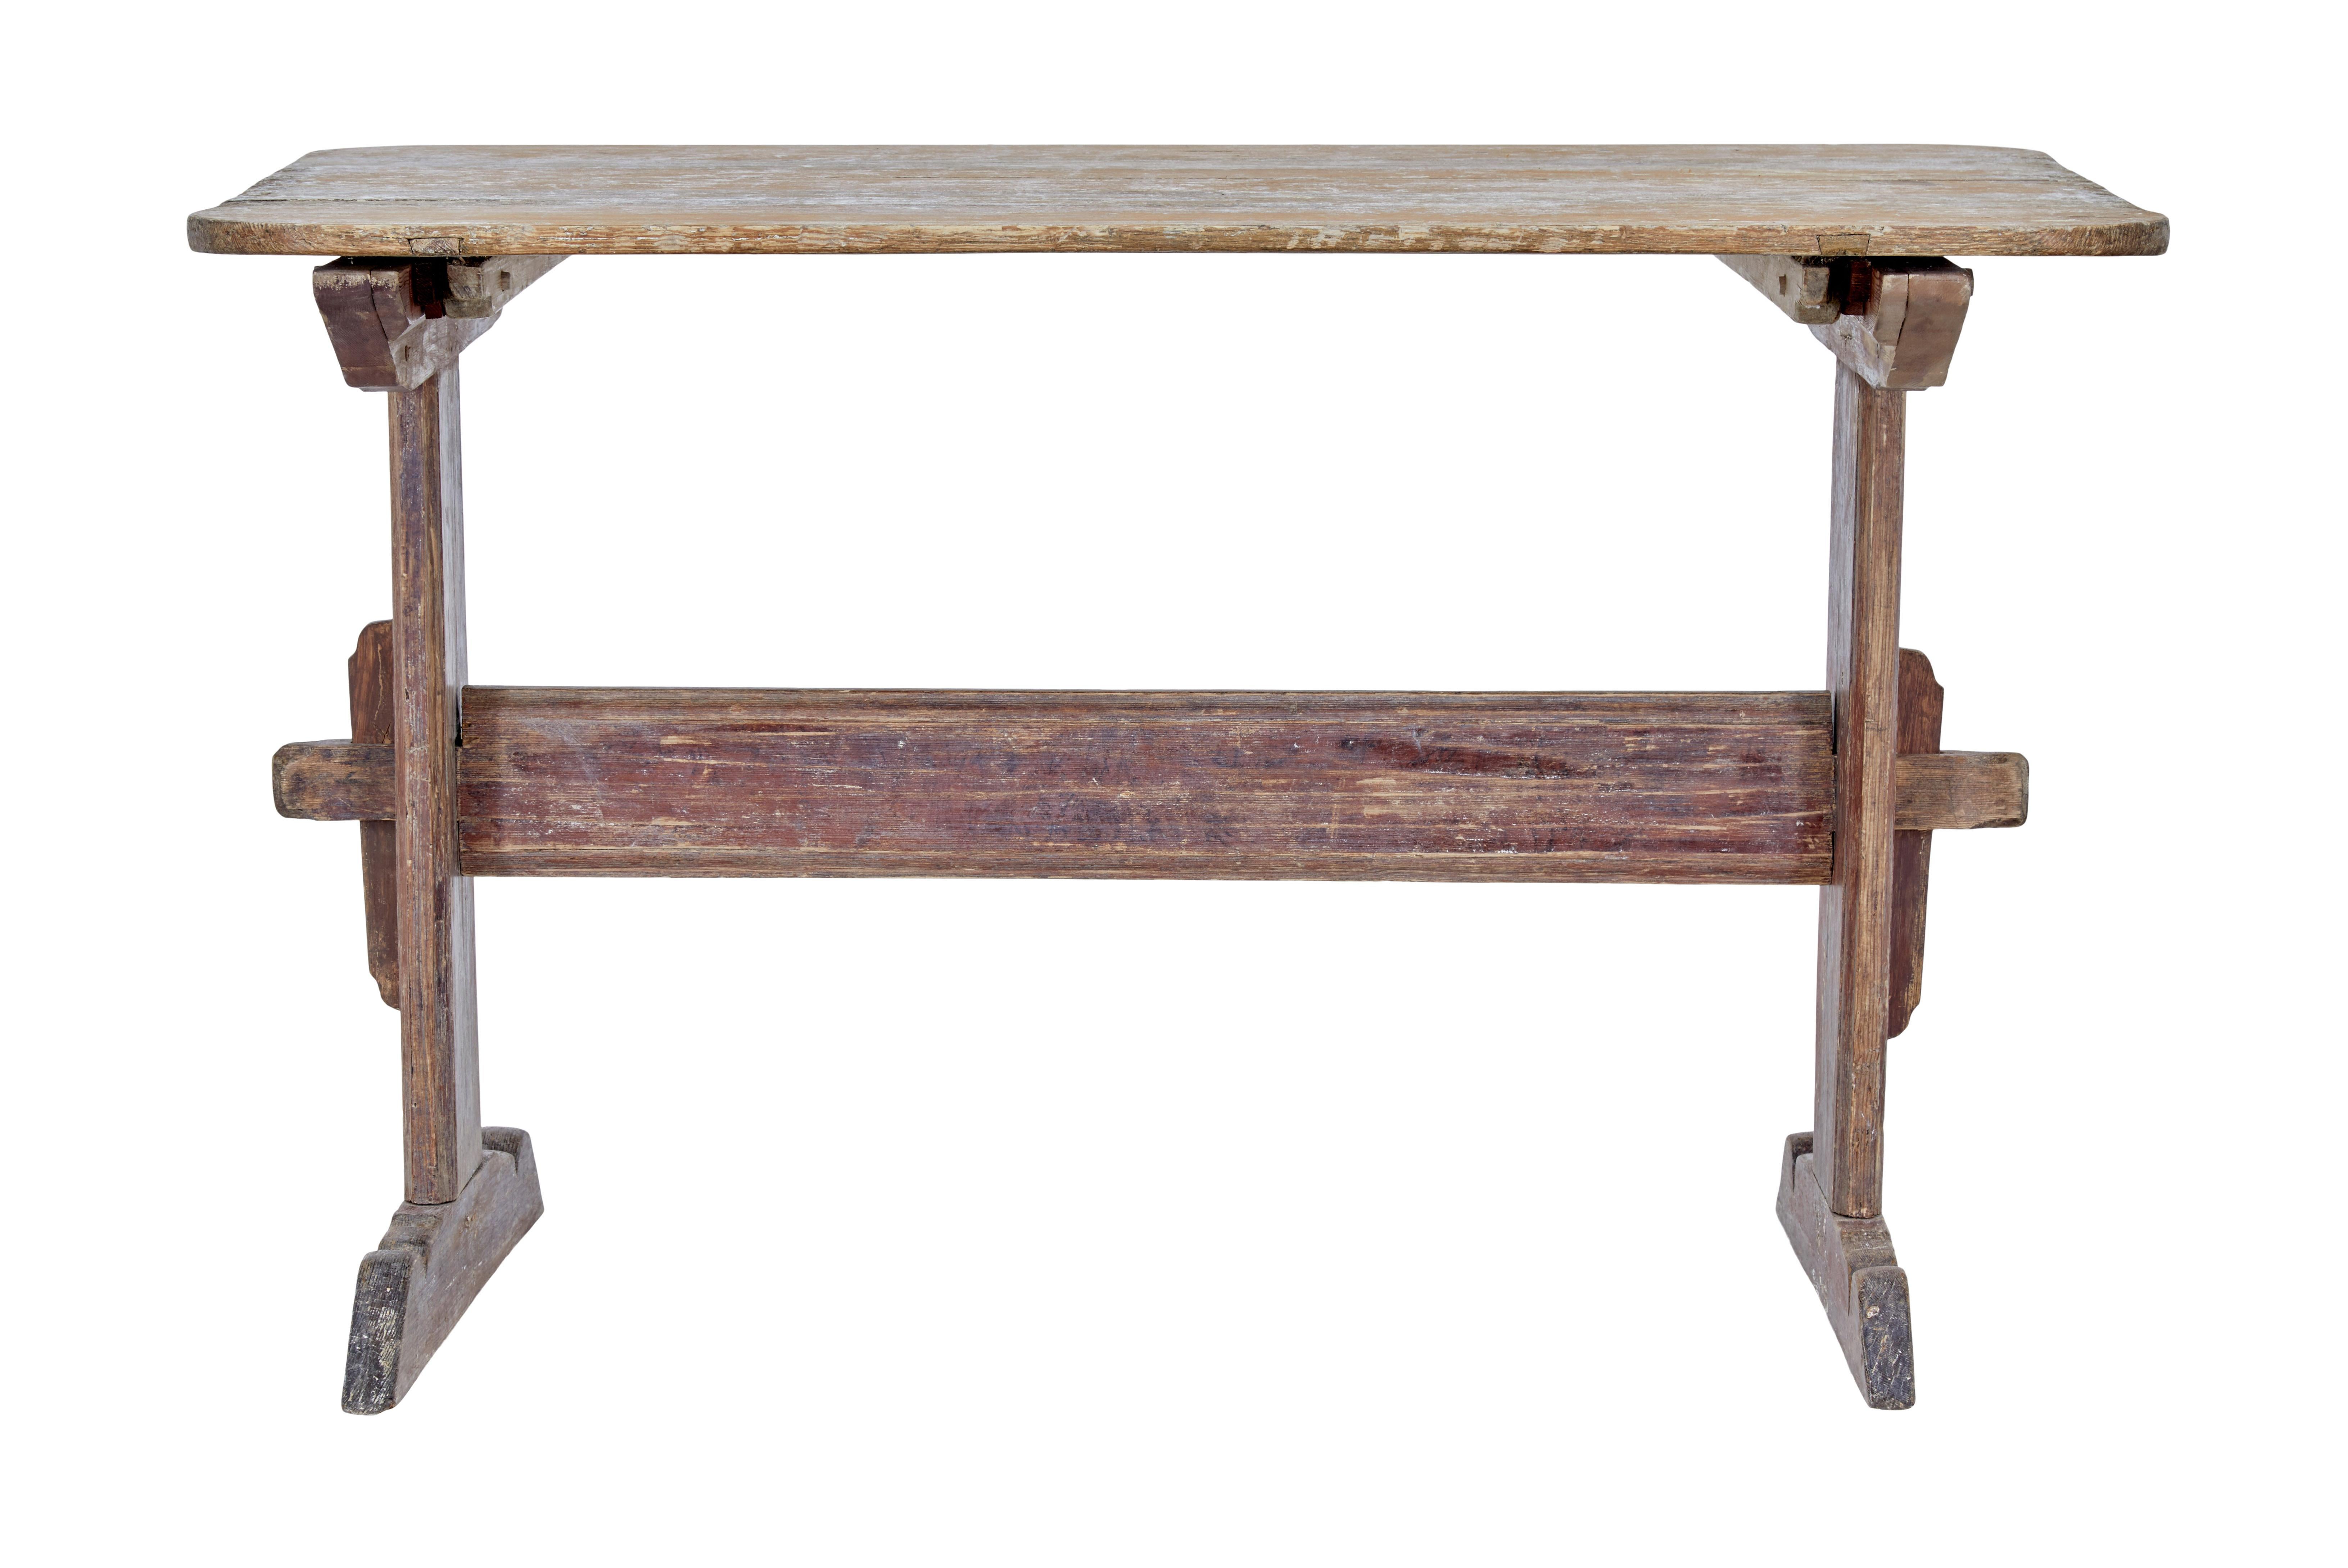 19th century rustic Swedish painted trestle table circa 1840.

Here we have a traditional Swedish table with traces of the original paint.

Light orange painted top with evidence that it may have been used for baking, supported red painted